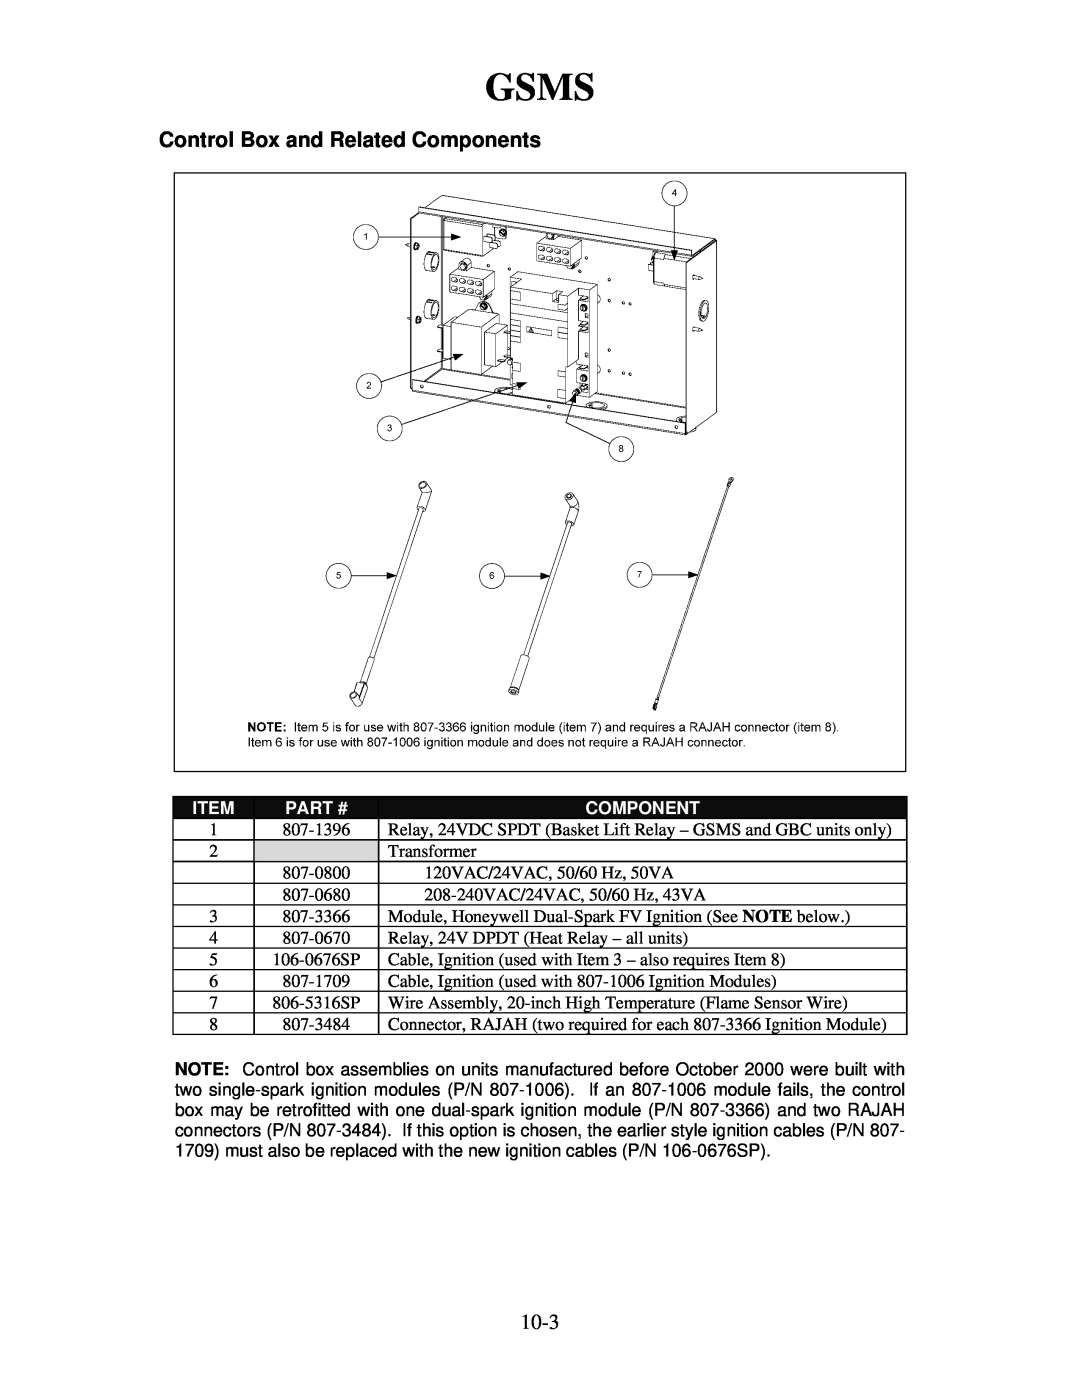 Frymaster 8196321 manual Gsms, Control Box and Related Components, Part # 